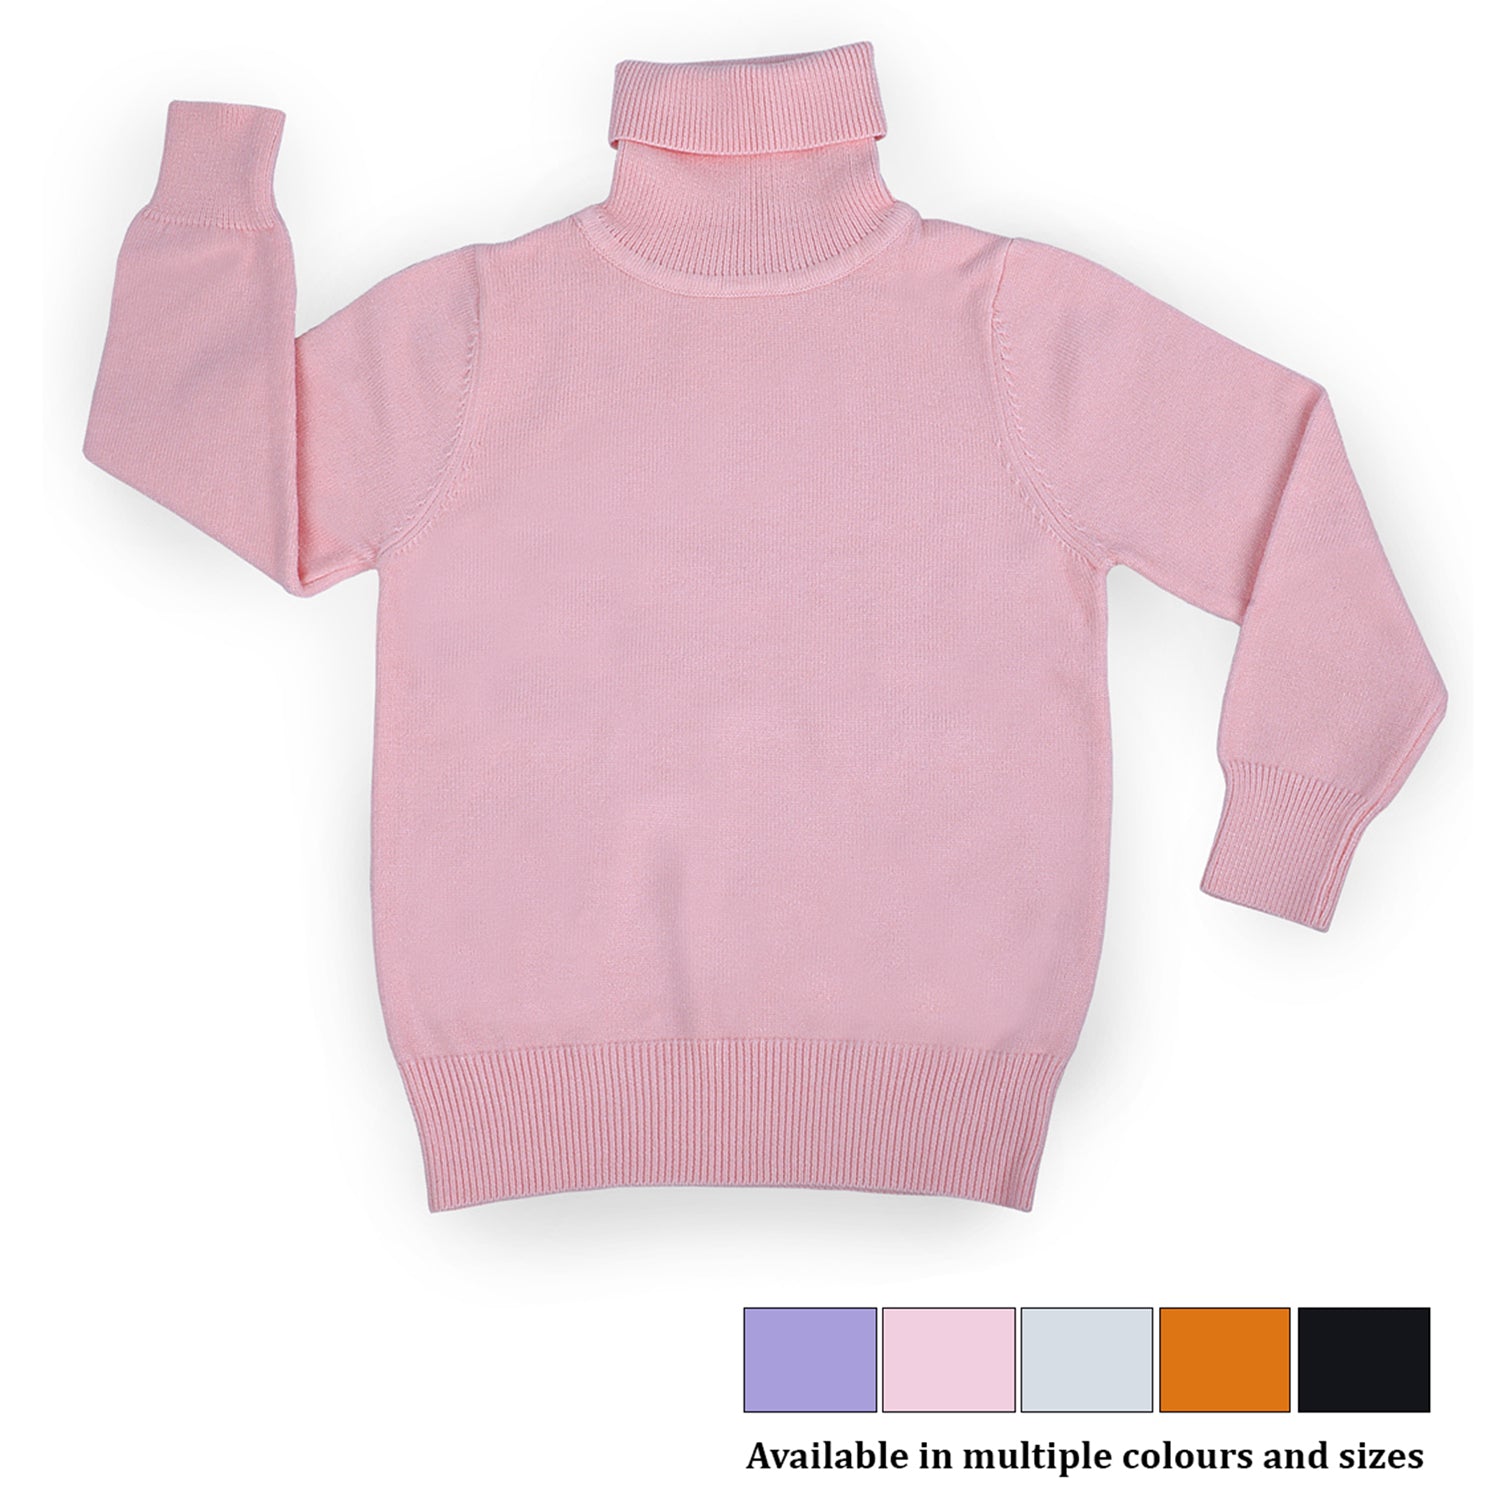 Basic Polo Neck Ribbed Premium Full Sleeves Knitted Kids Sweater - Pink